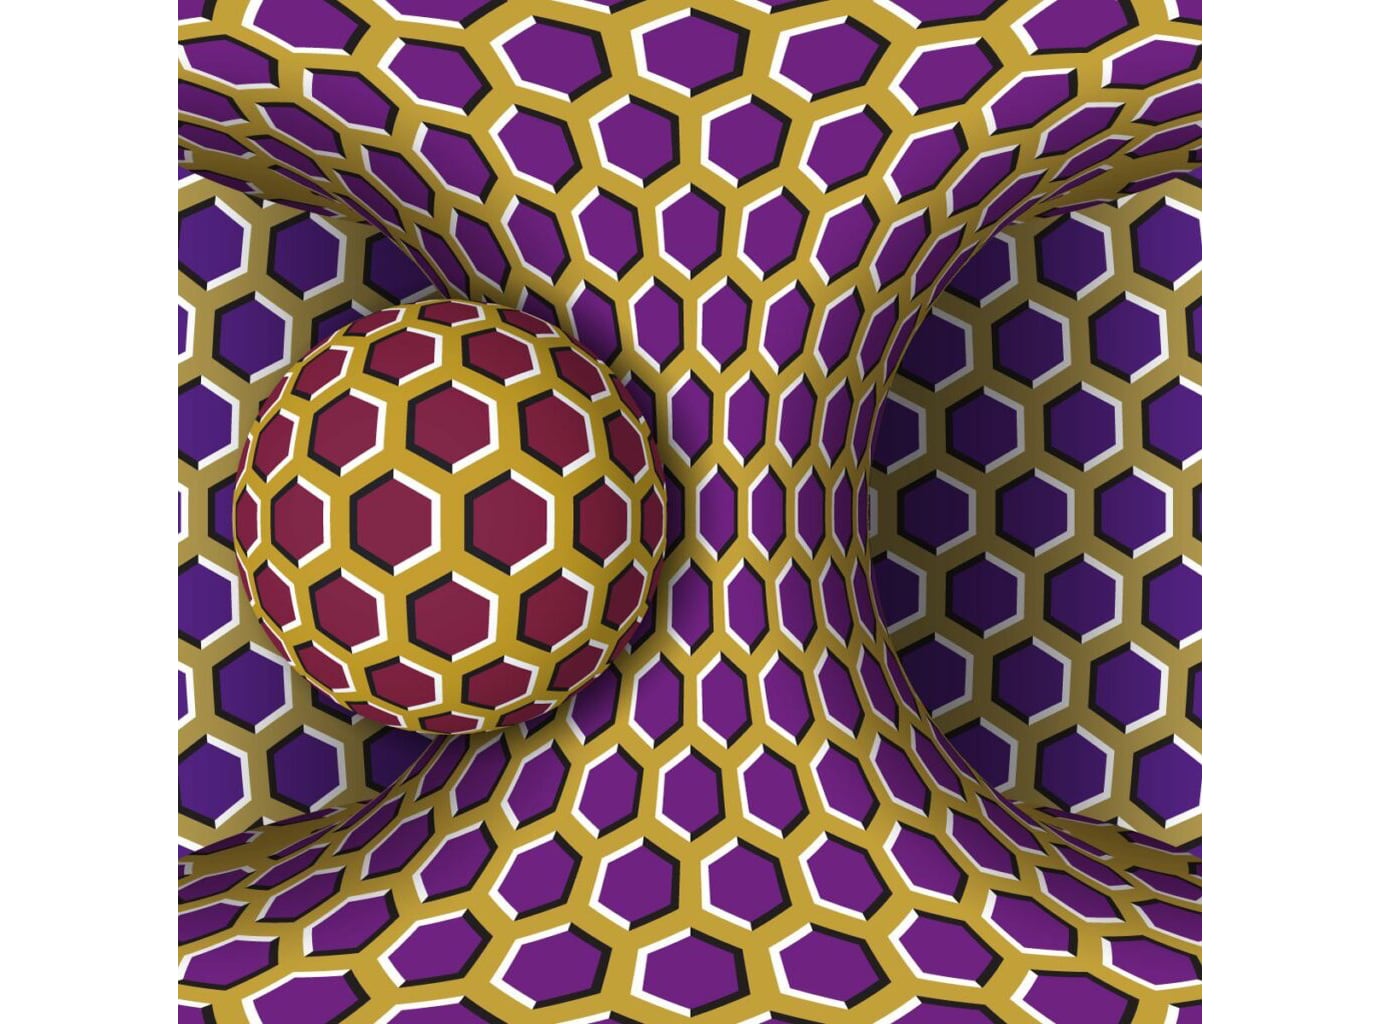 This Image is not moving!